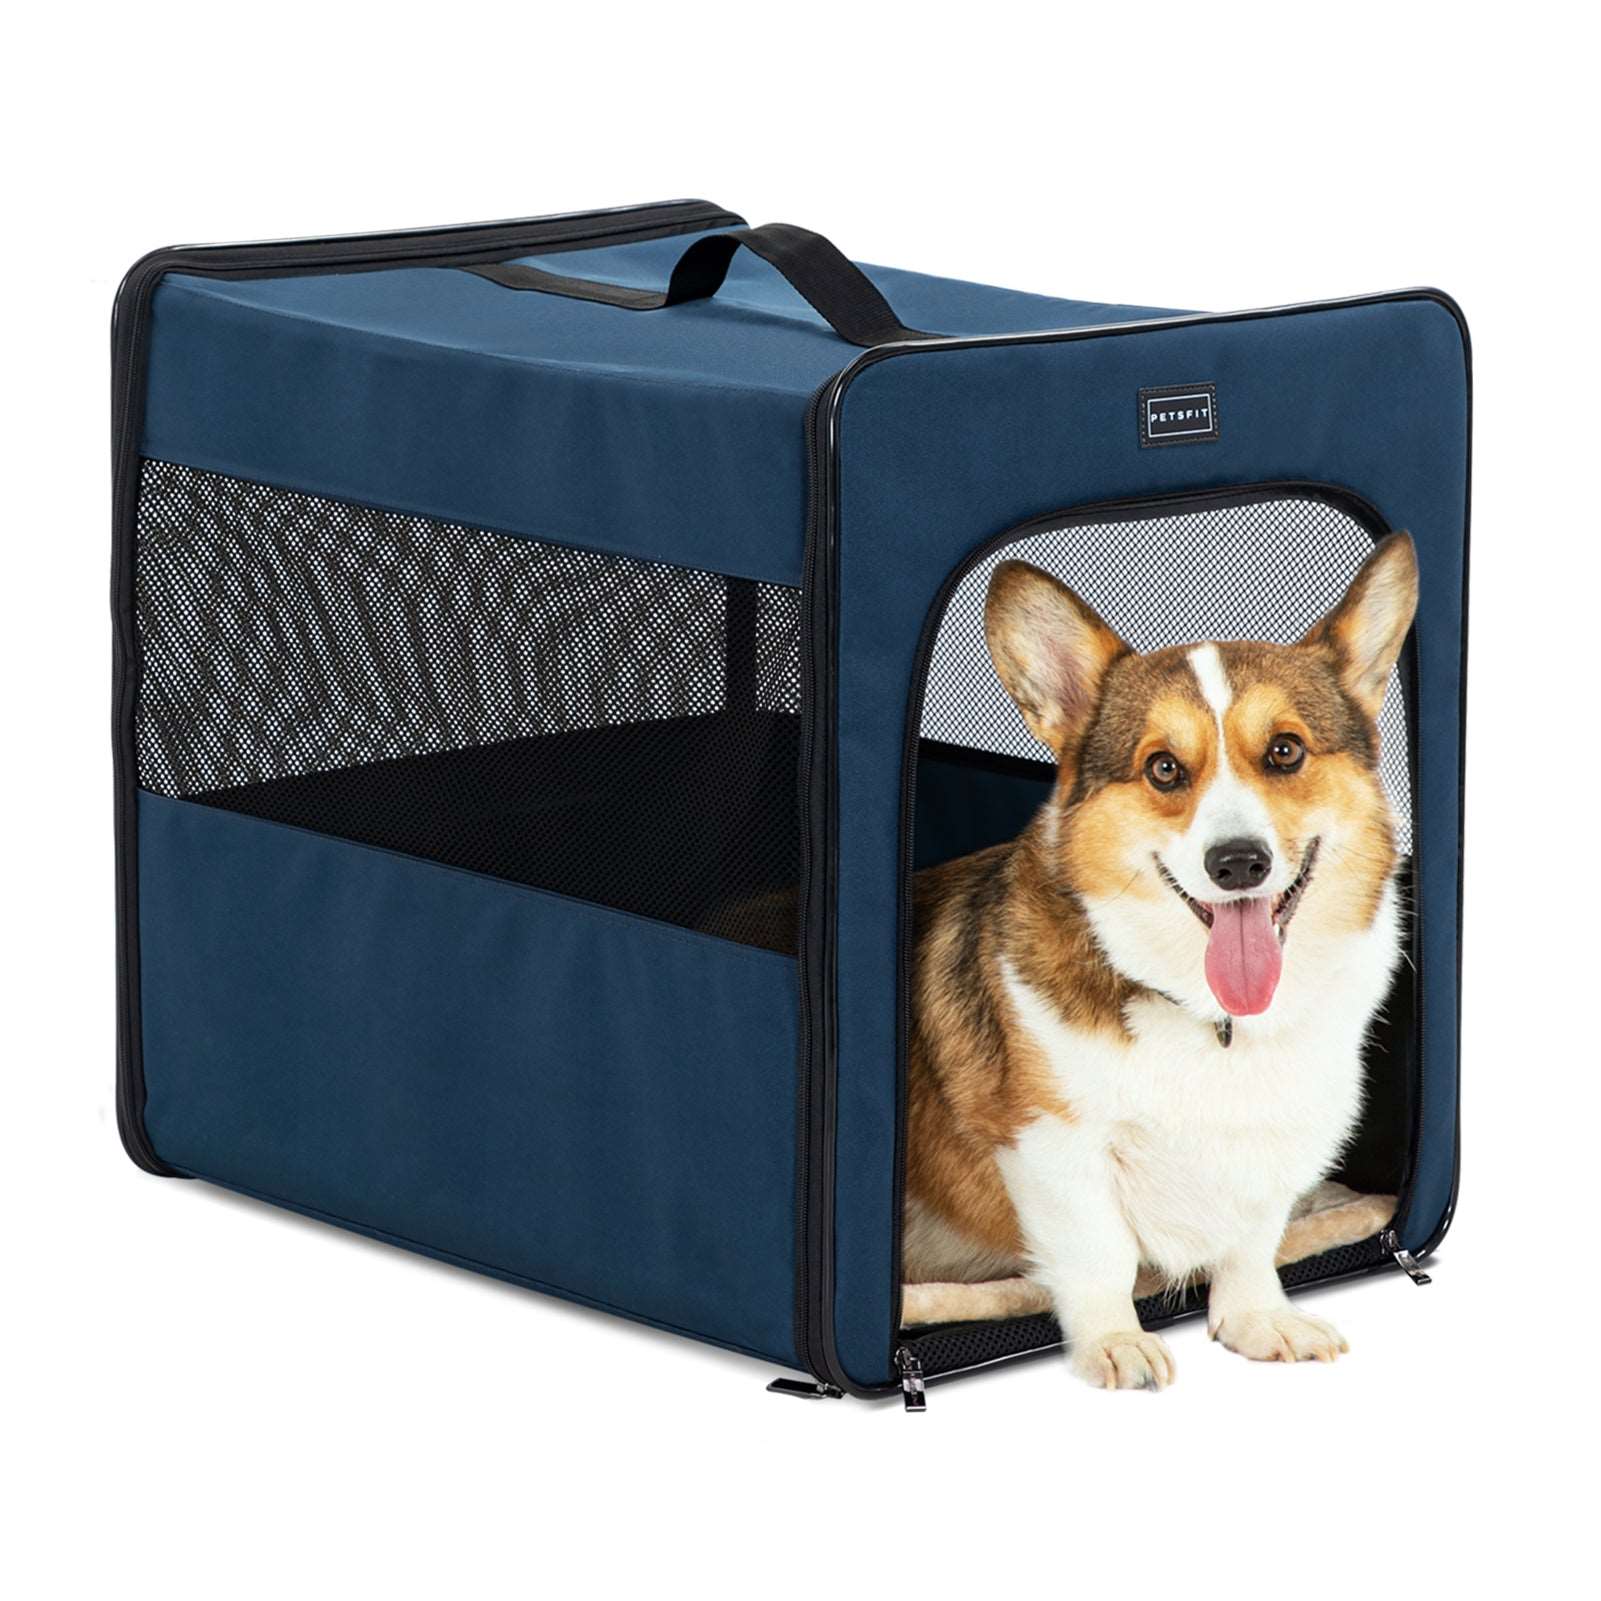 Petsfit-Portable-Dog-Crate-24-Inch-13